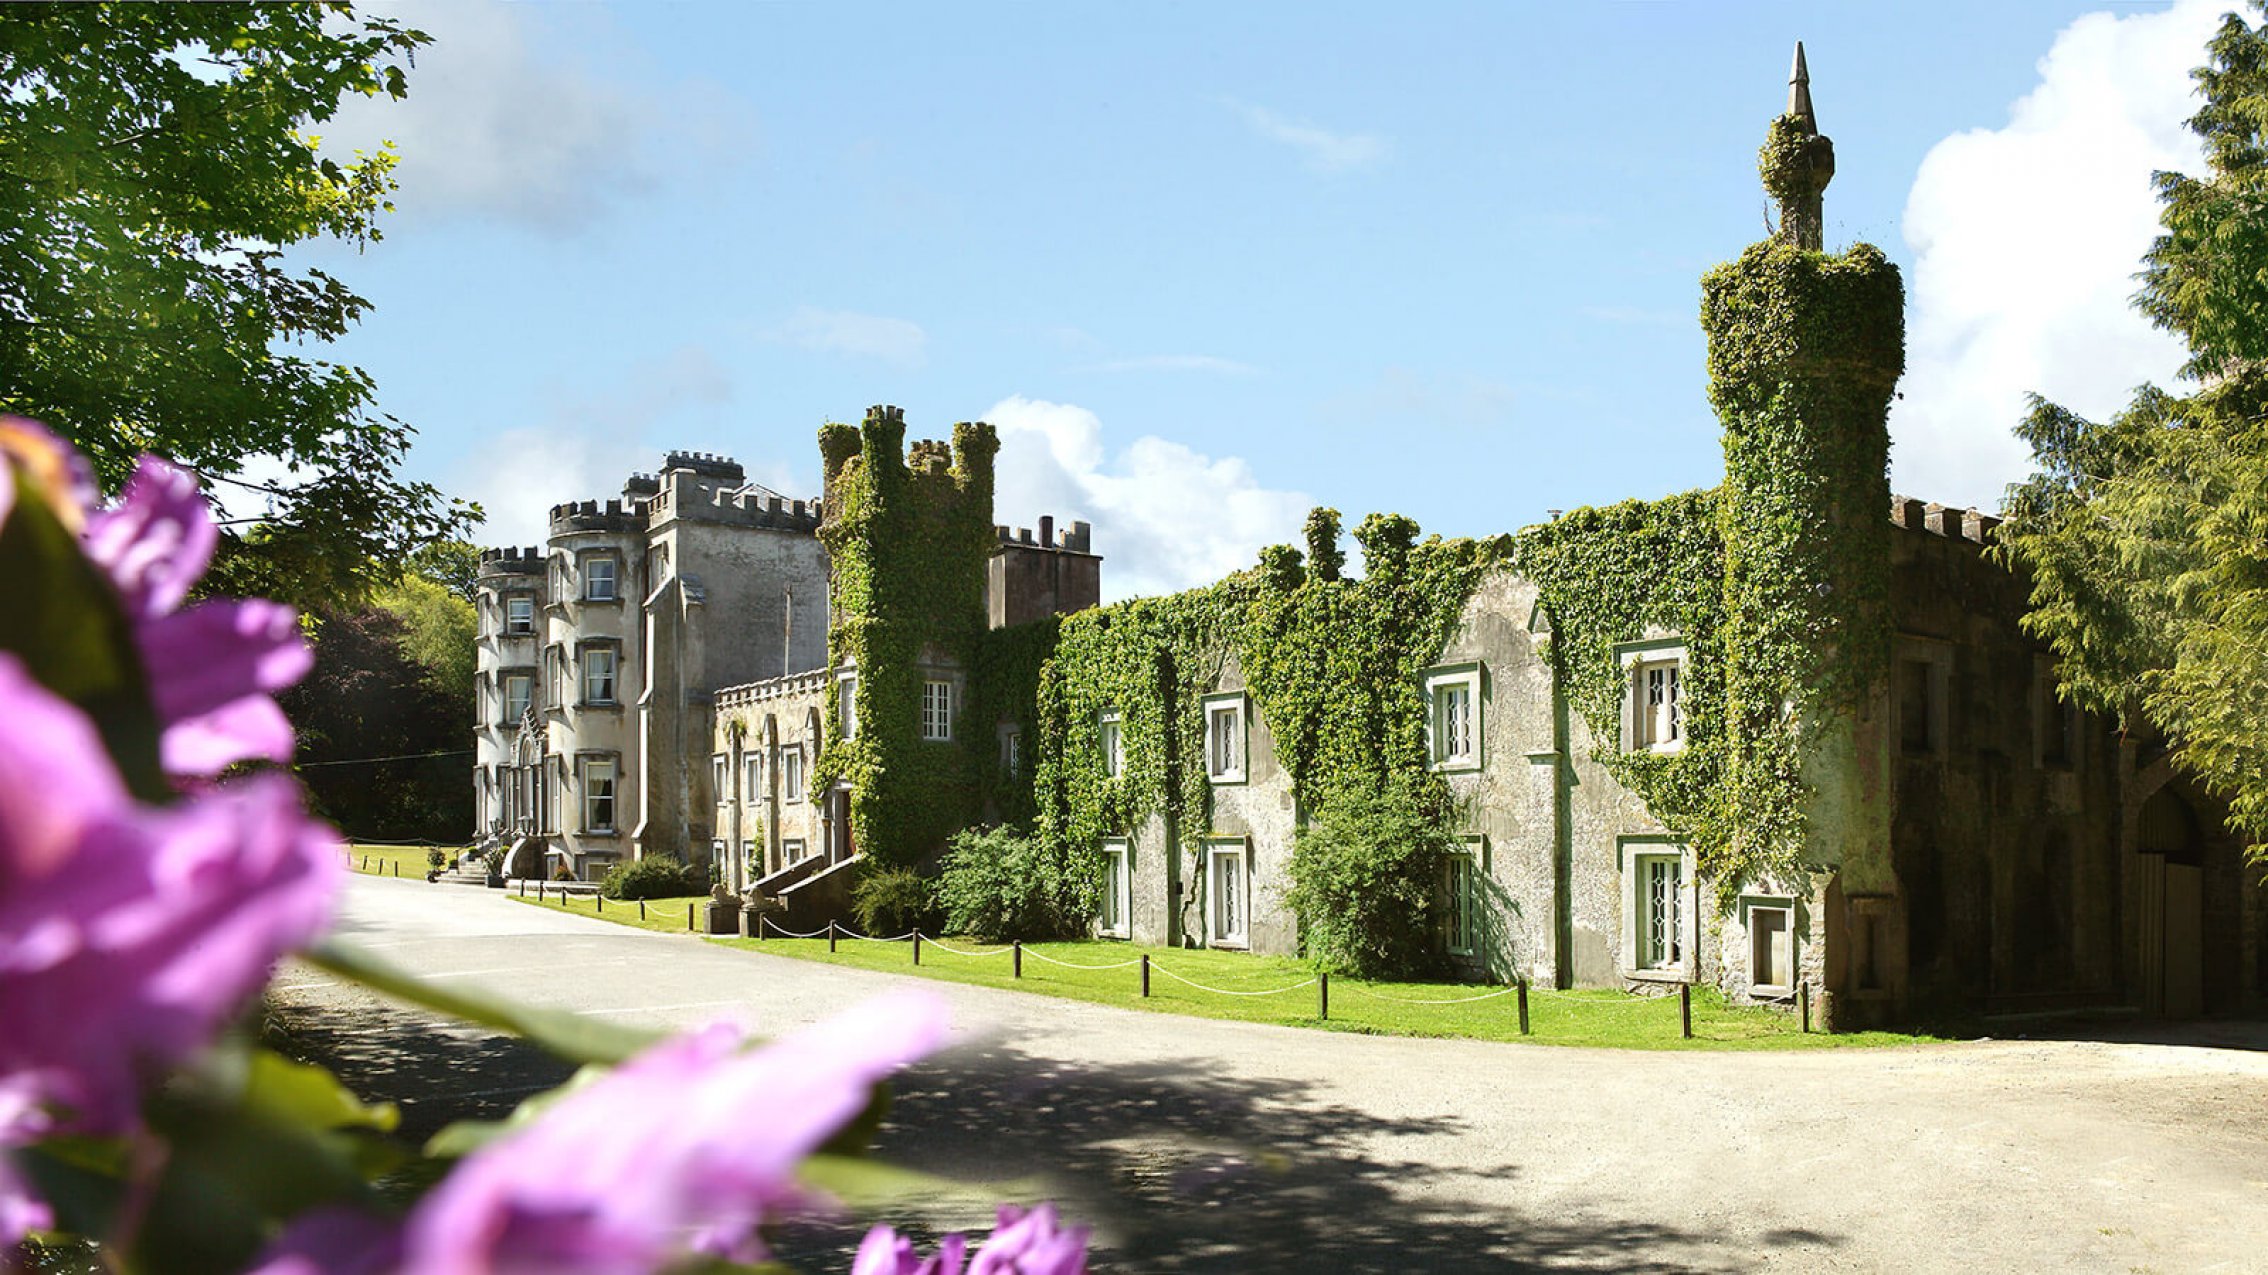 The exterior view of Ballyseede Castle and Gardens